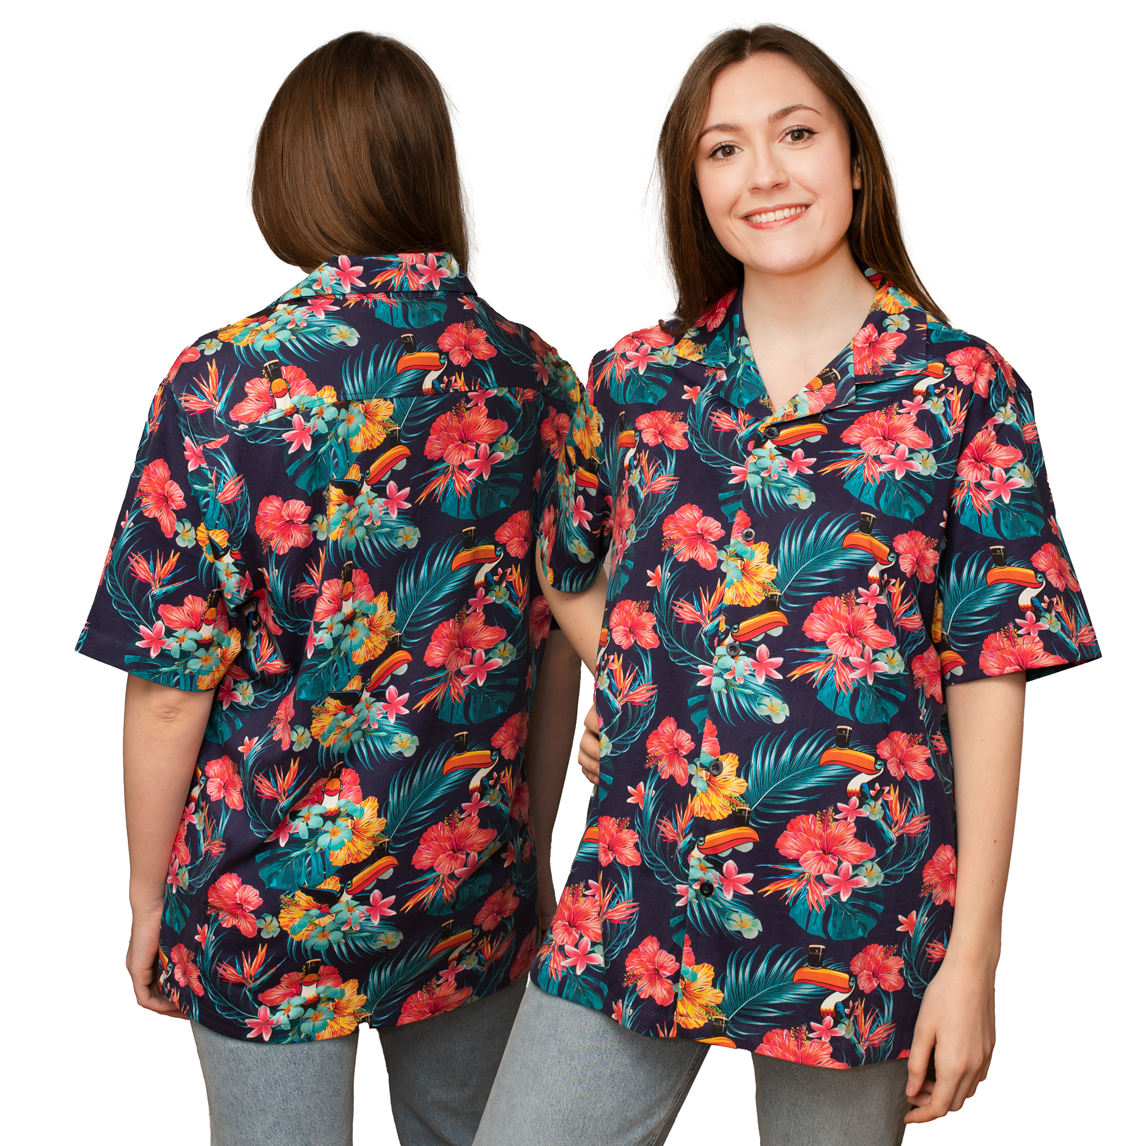 A woman donning a vibrant Guinness Toucan Hawaiian shirt adorned with tropical plants and flowers from Guinness UK.